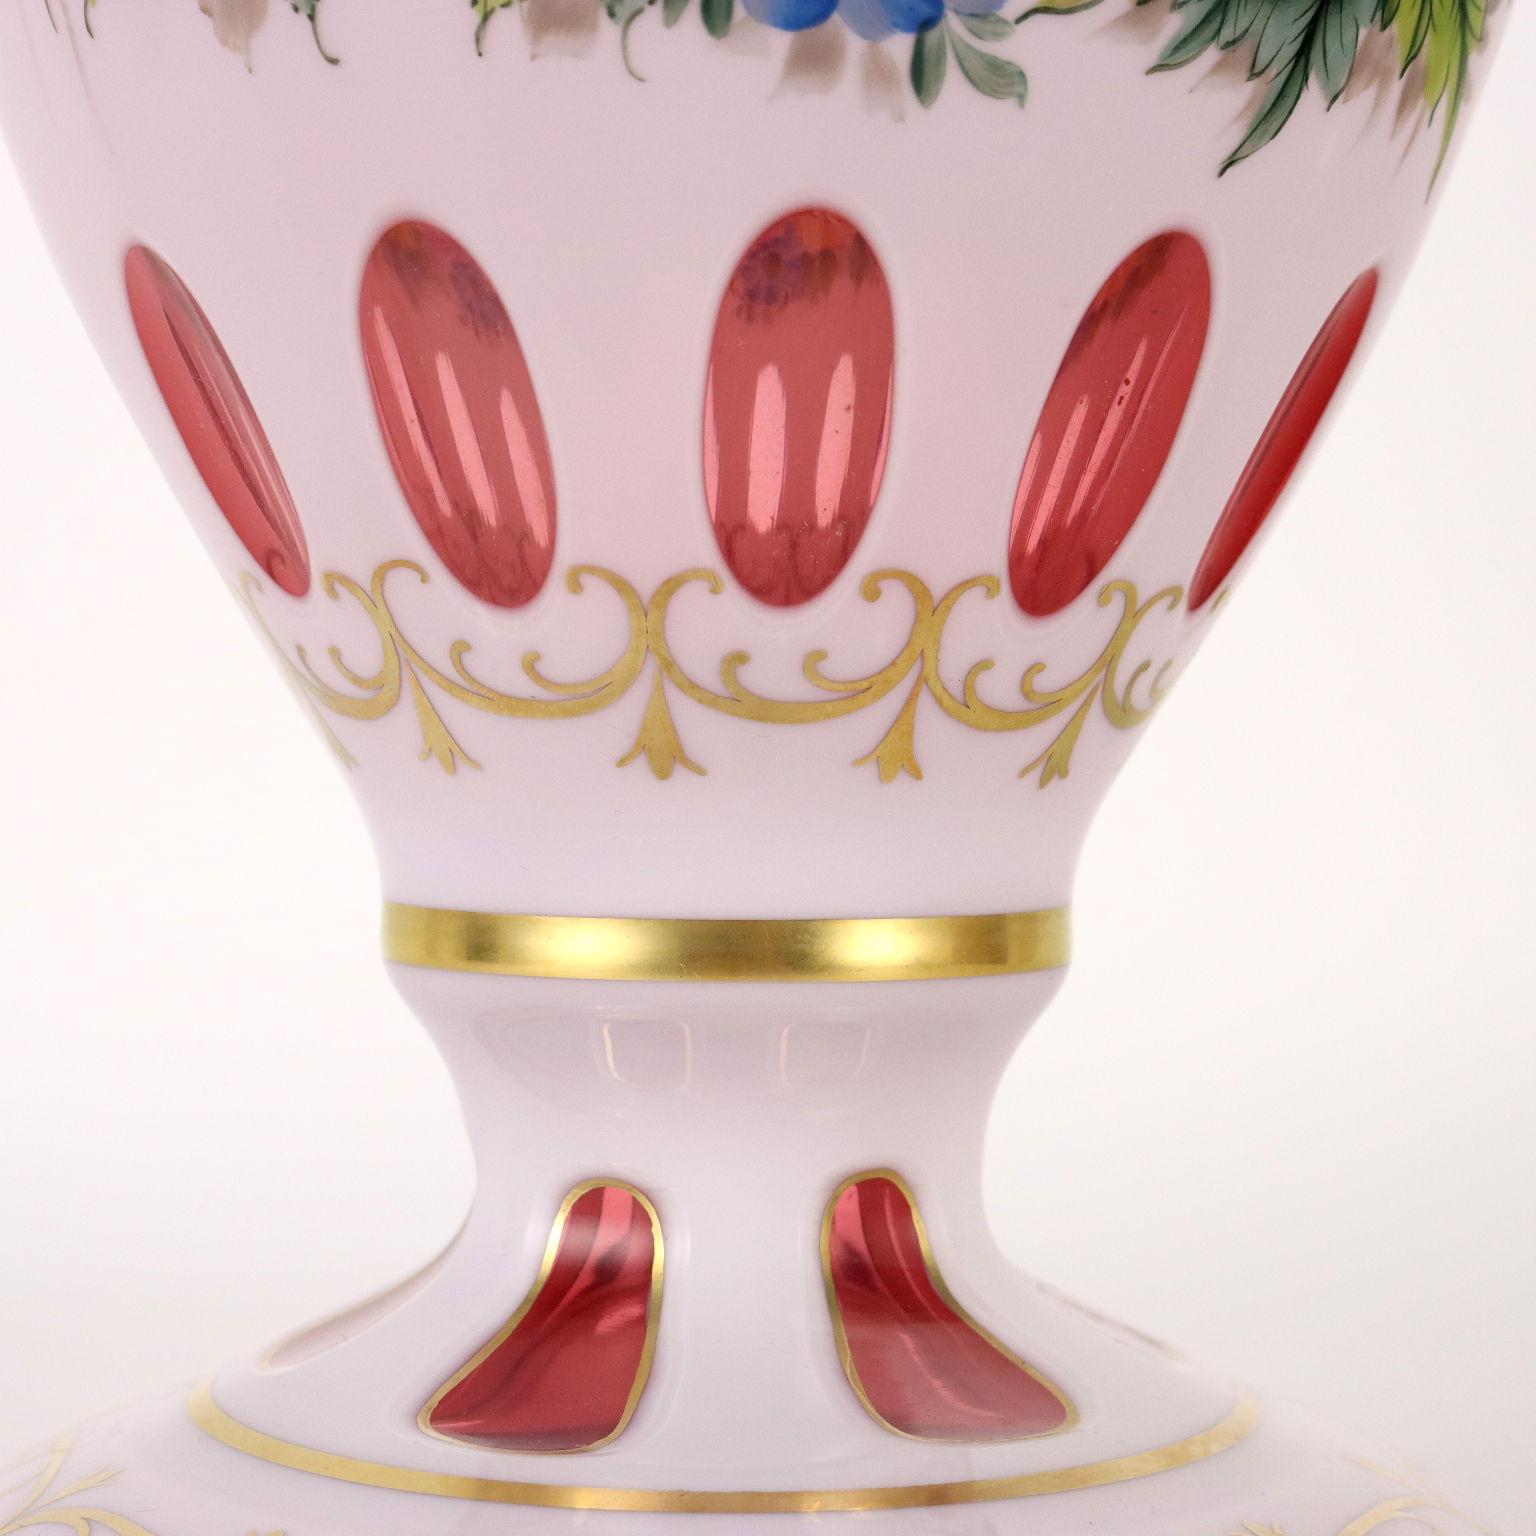 Moser Bohemia Crystal Vase Tschecoslovakia XX Century In Good Condition For Sale In Milano, IT